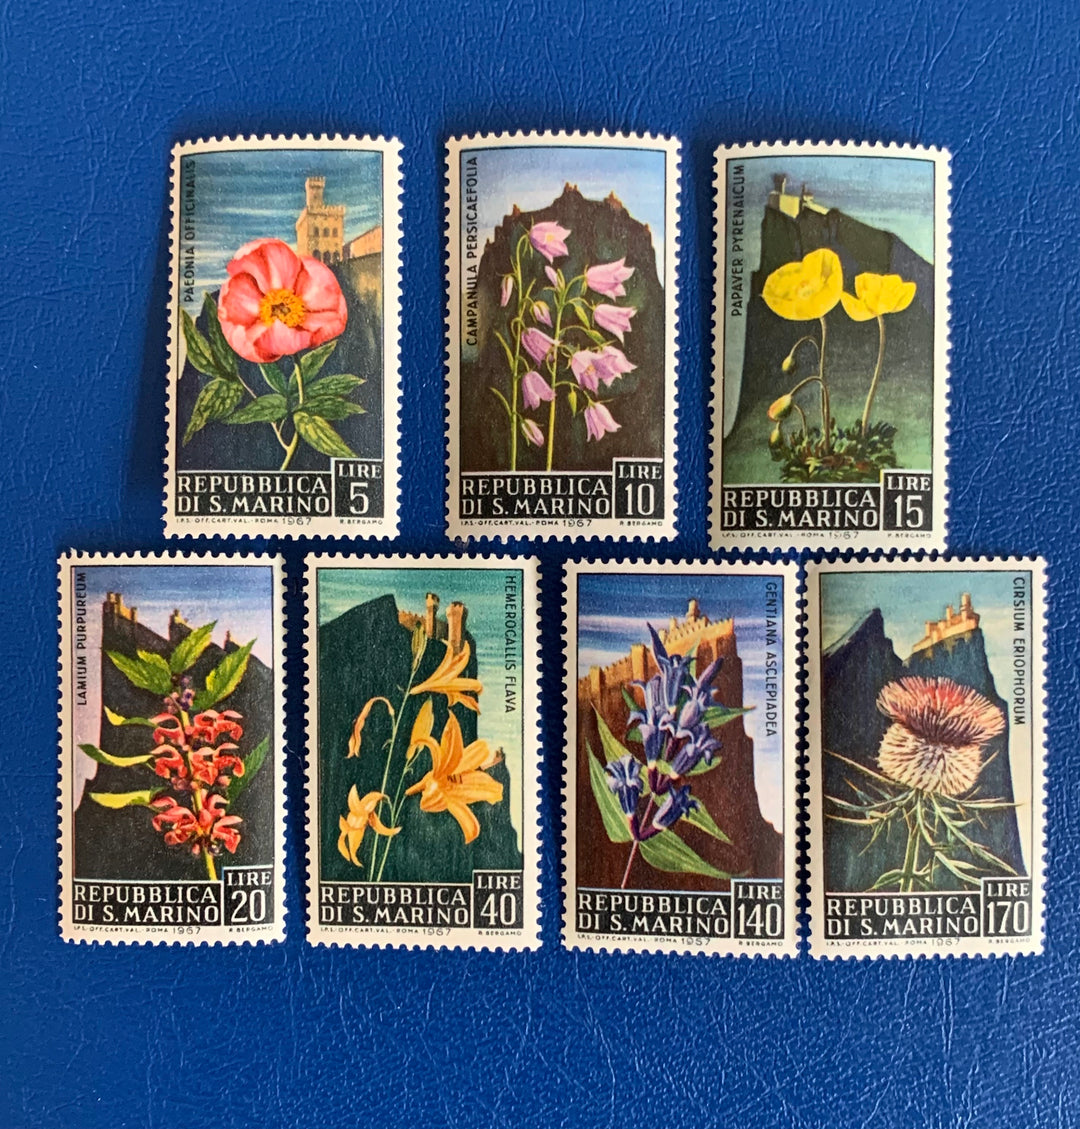 San Marino - Original Vintage Postage Stamps- 1967 Flowers - for the collector, artist or crafter